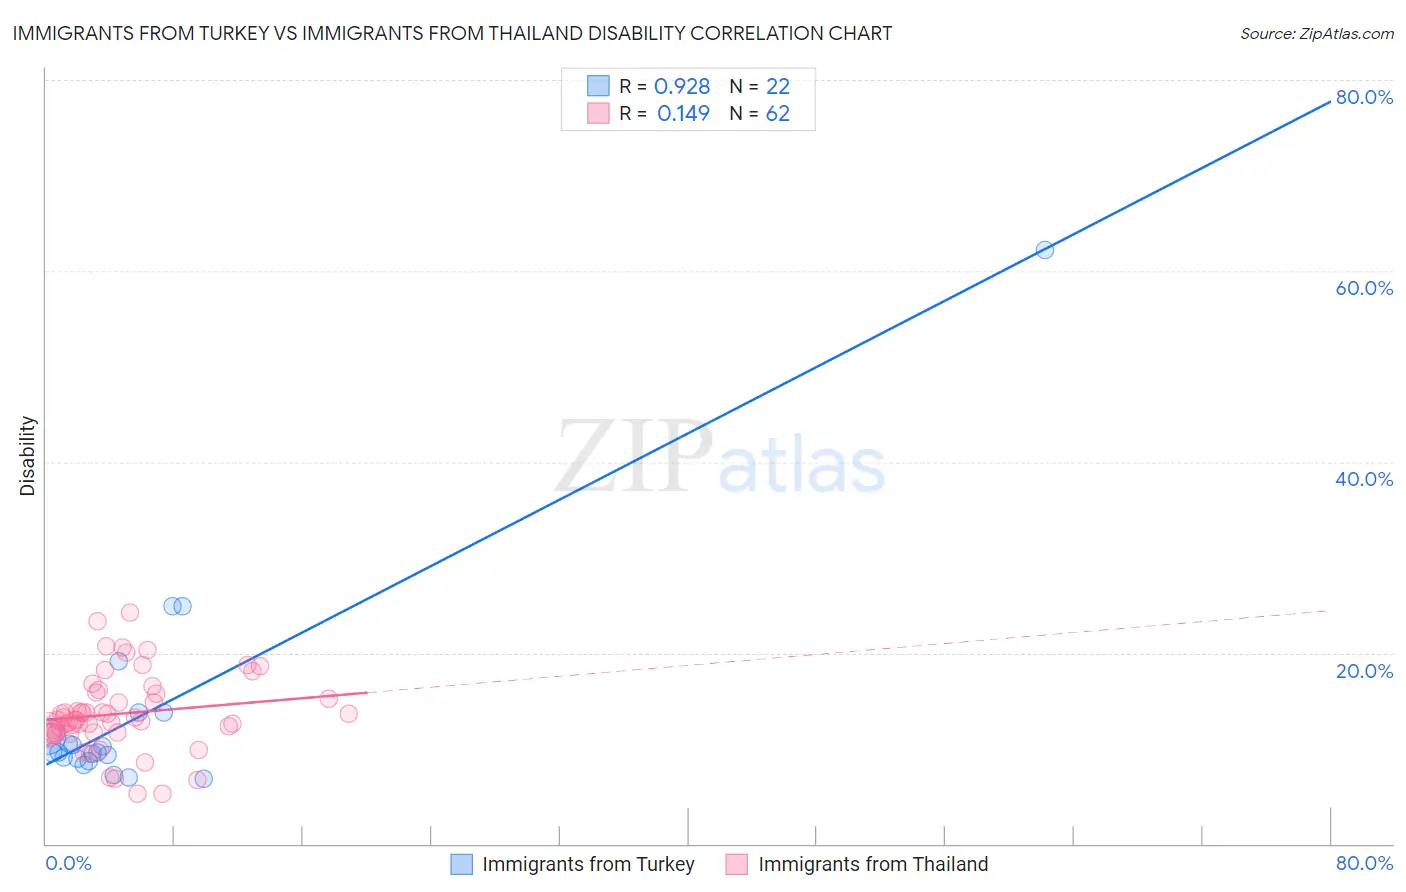 Immigrants from Turkey vs Immigrants from Thailand Disability